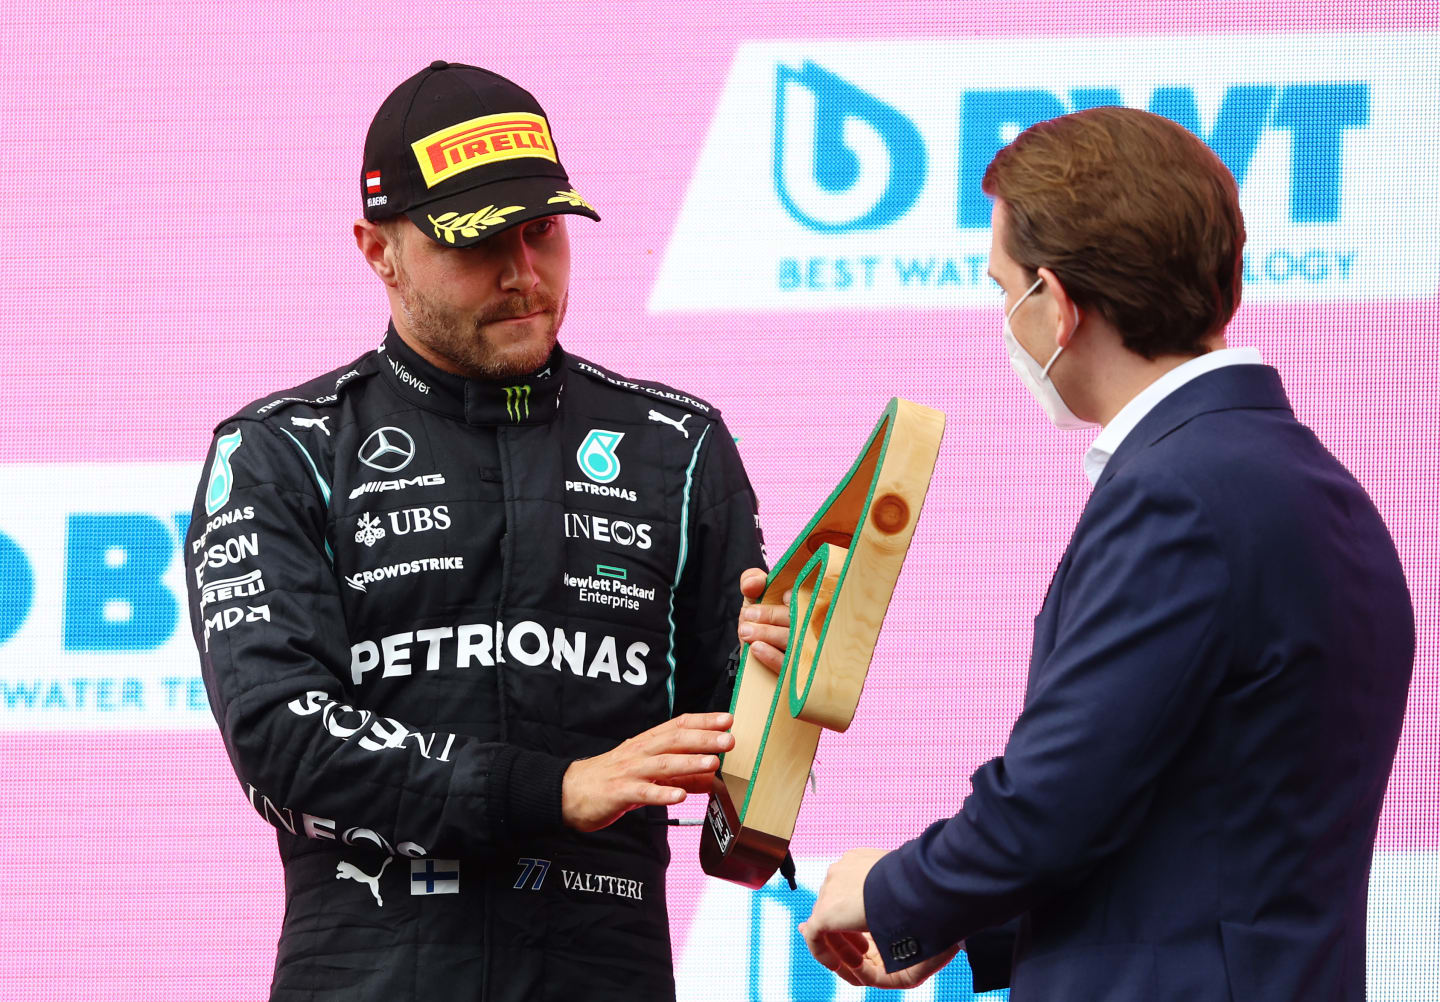 SPIELBERG, AUSTRIA - JUNE 27: Third placed Valtteri Bottas of Finland and Mercedes GP celebrates on the podium during the F1 Grand Prix of Styria at Red Bull Ring on June 27, 2021 in Spielberg, Austria. (Photo by Bryn Lennon/Getty Images)